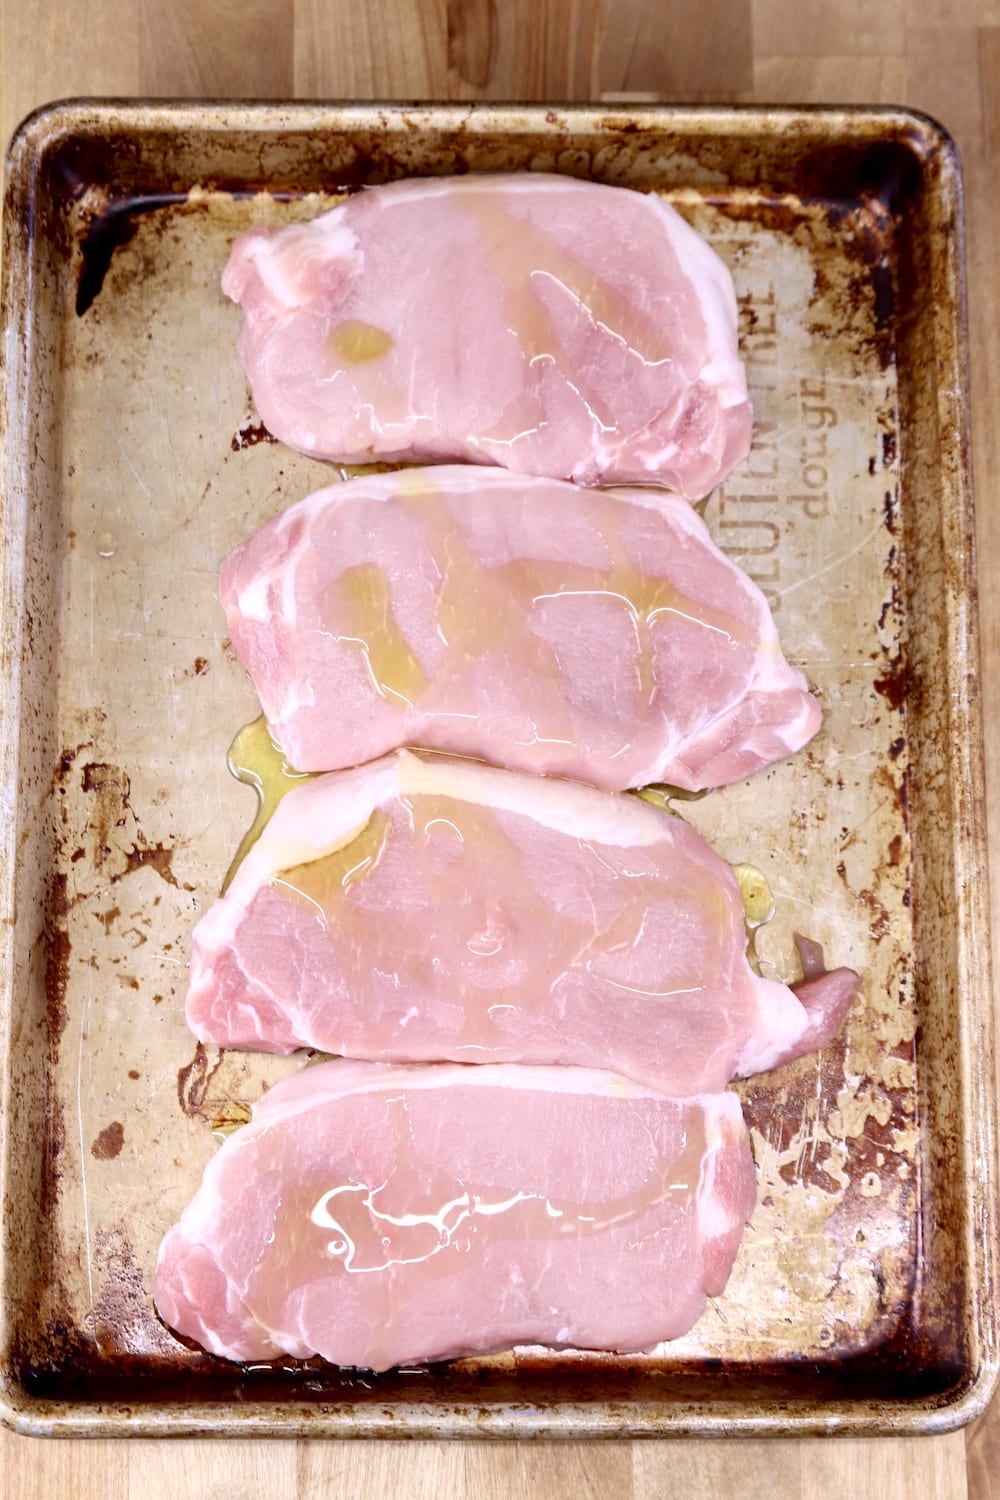 4 pork chops on a baking sheet drizzled with olive oil